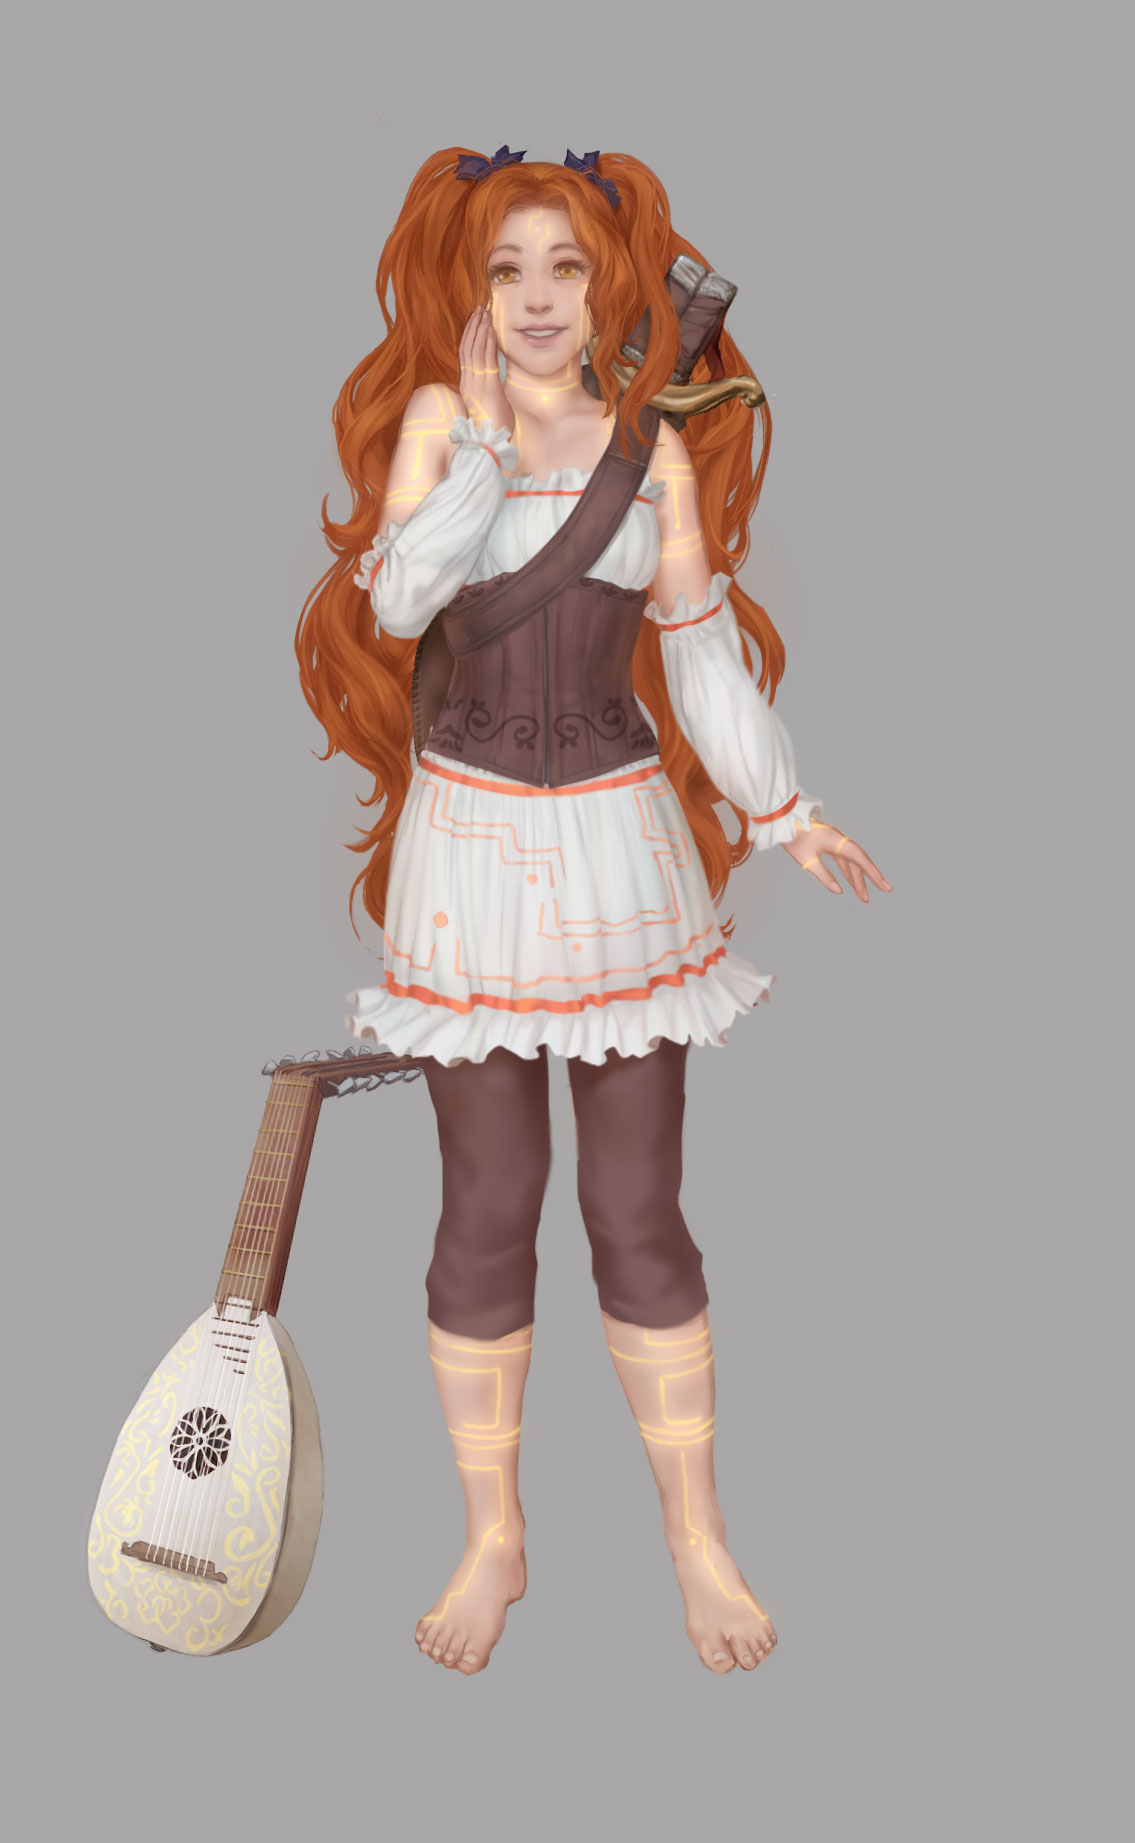 Character is [LAH - LEE - UH] (L-A-L-I-A) from the Knights. Lalia is a Lumenari and has yellow runes like tattoos across her body: A red haired woman stands here. She has a lute at her side and her red hair is done up in pigtails. She wears a simple outfit consisting of a sleeveless white dress and earthy brown corset. Leggings of the same brown creep down her legs to end at her shin. Sleeves of the same white, light cotton material are worn from her elbow to her wrists.